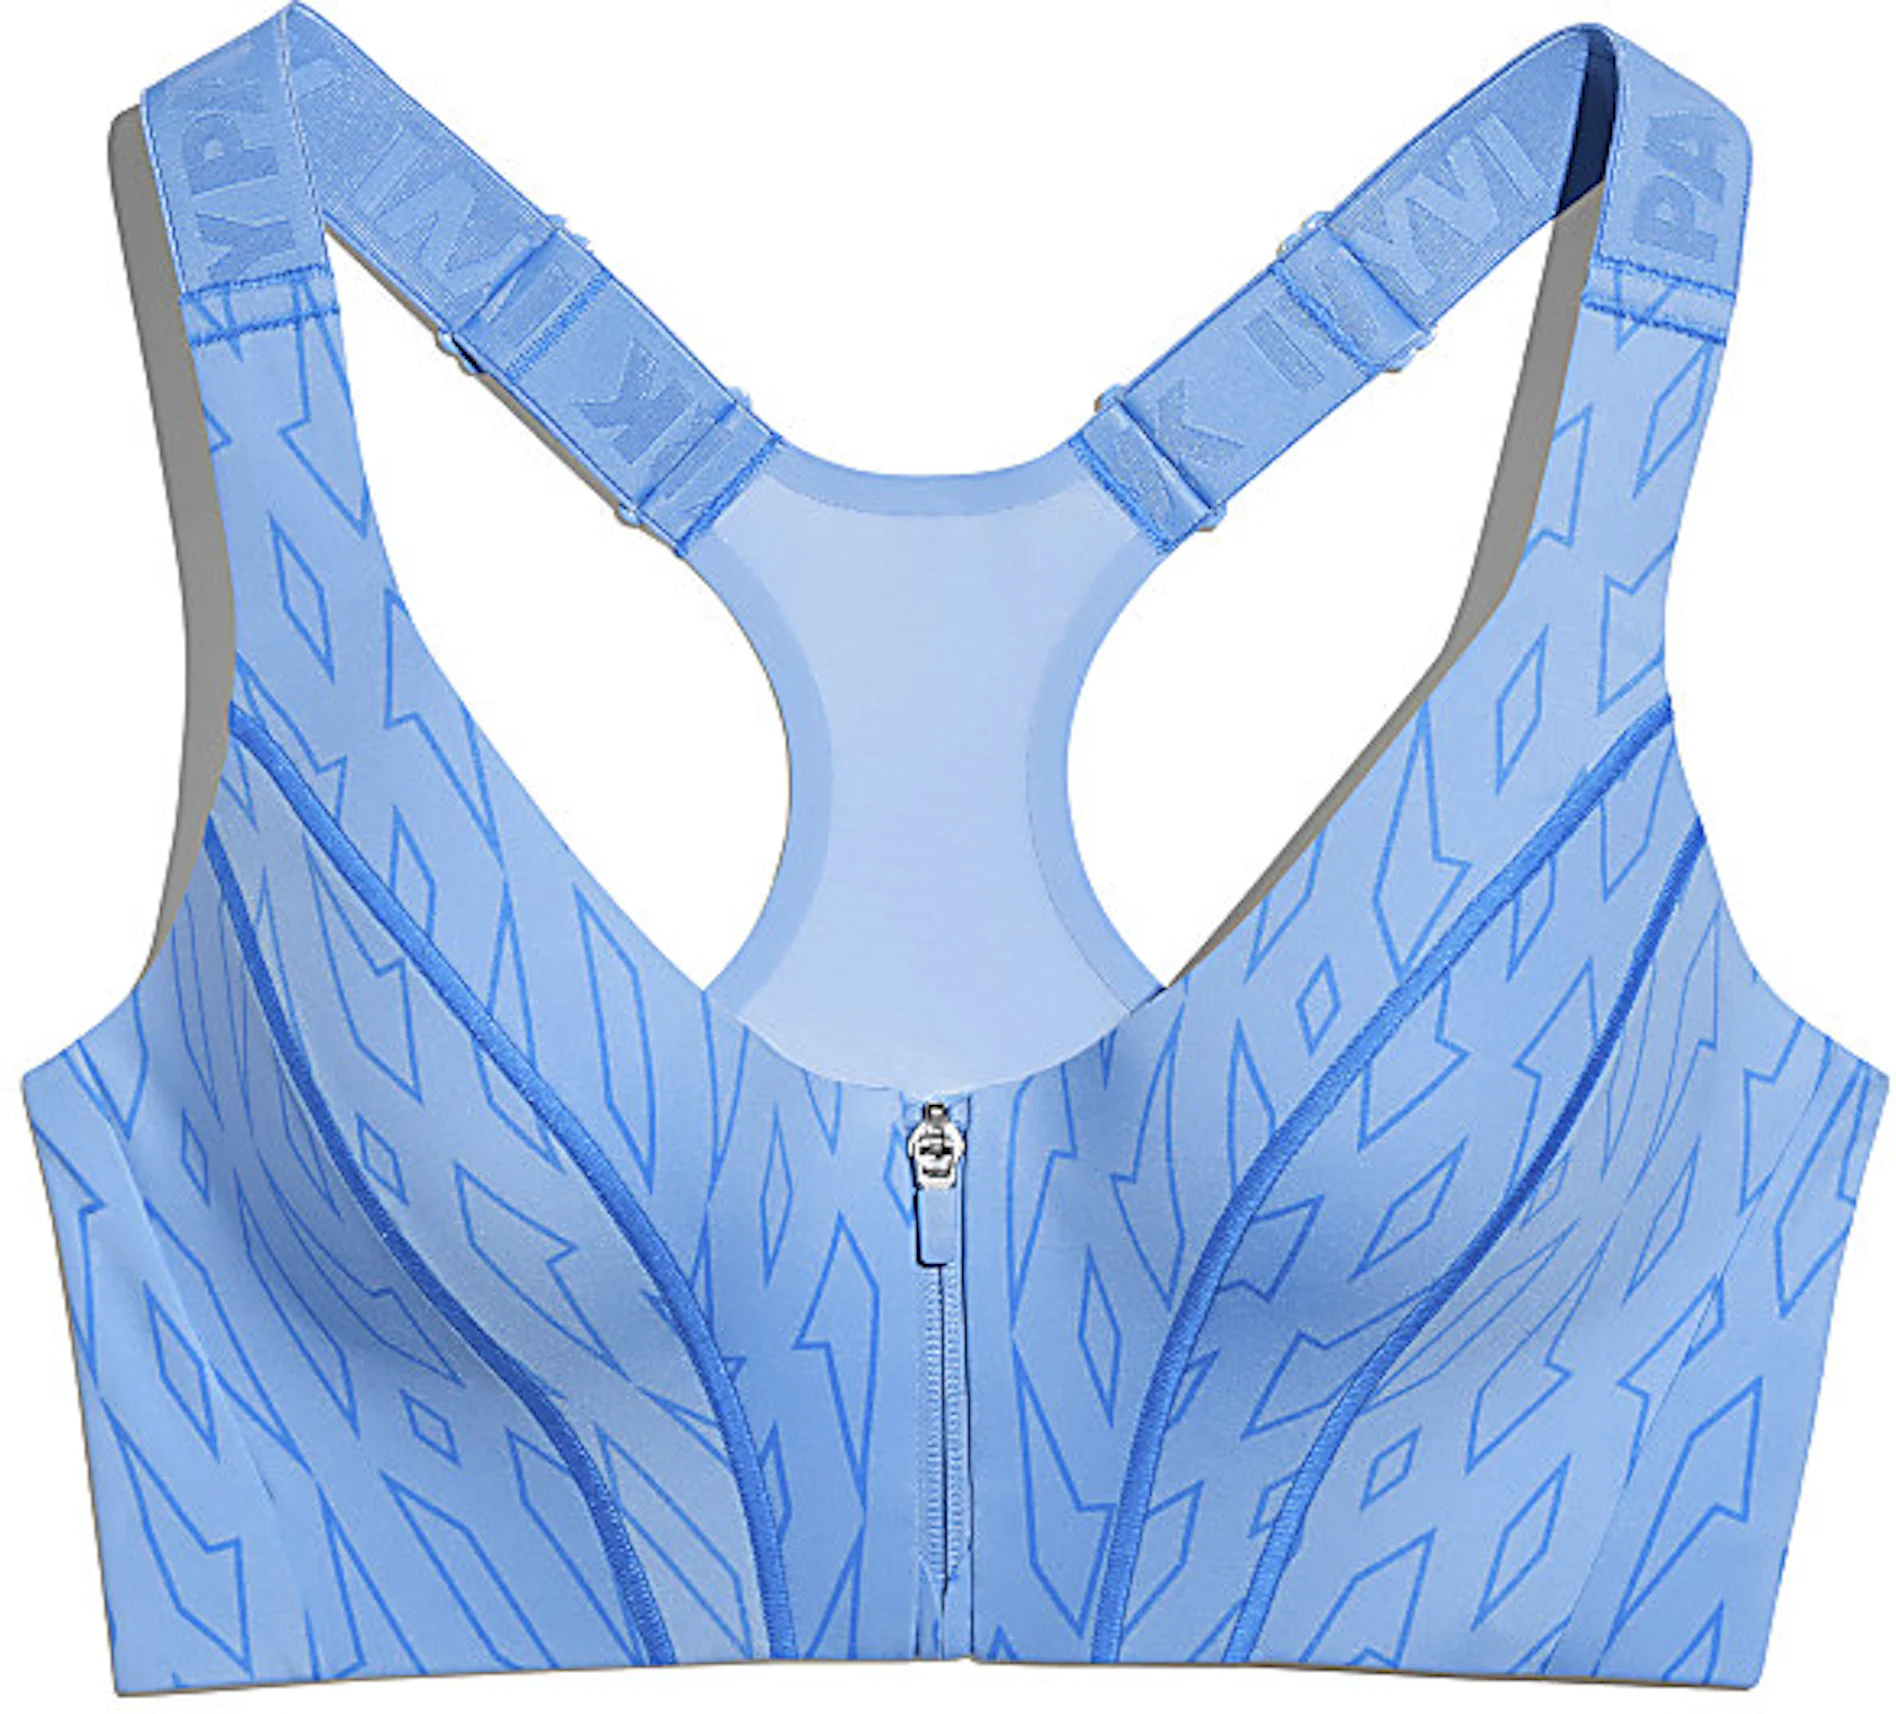 IVY PARK, Other, Brand New Ivy Park Sports Bra Top And Tights Baby Blue